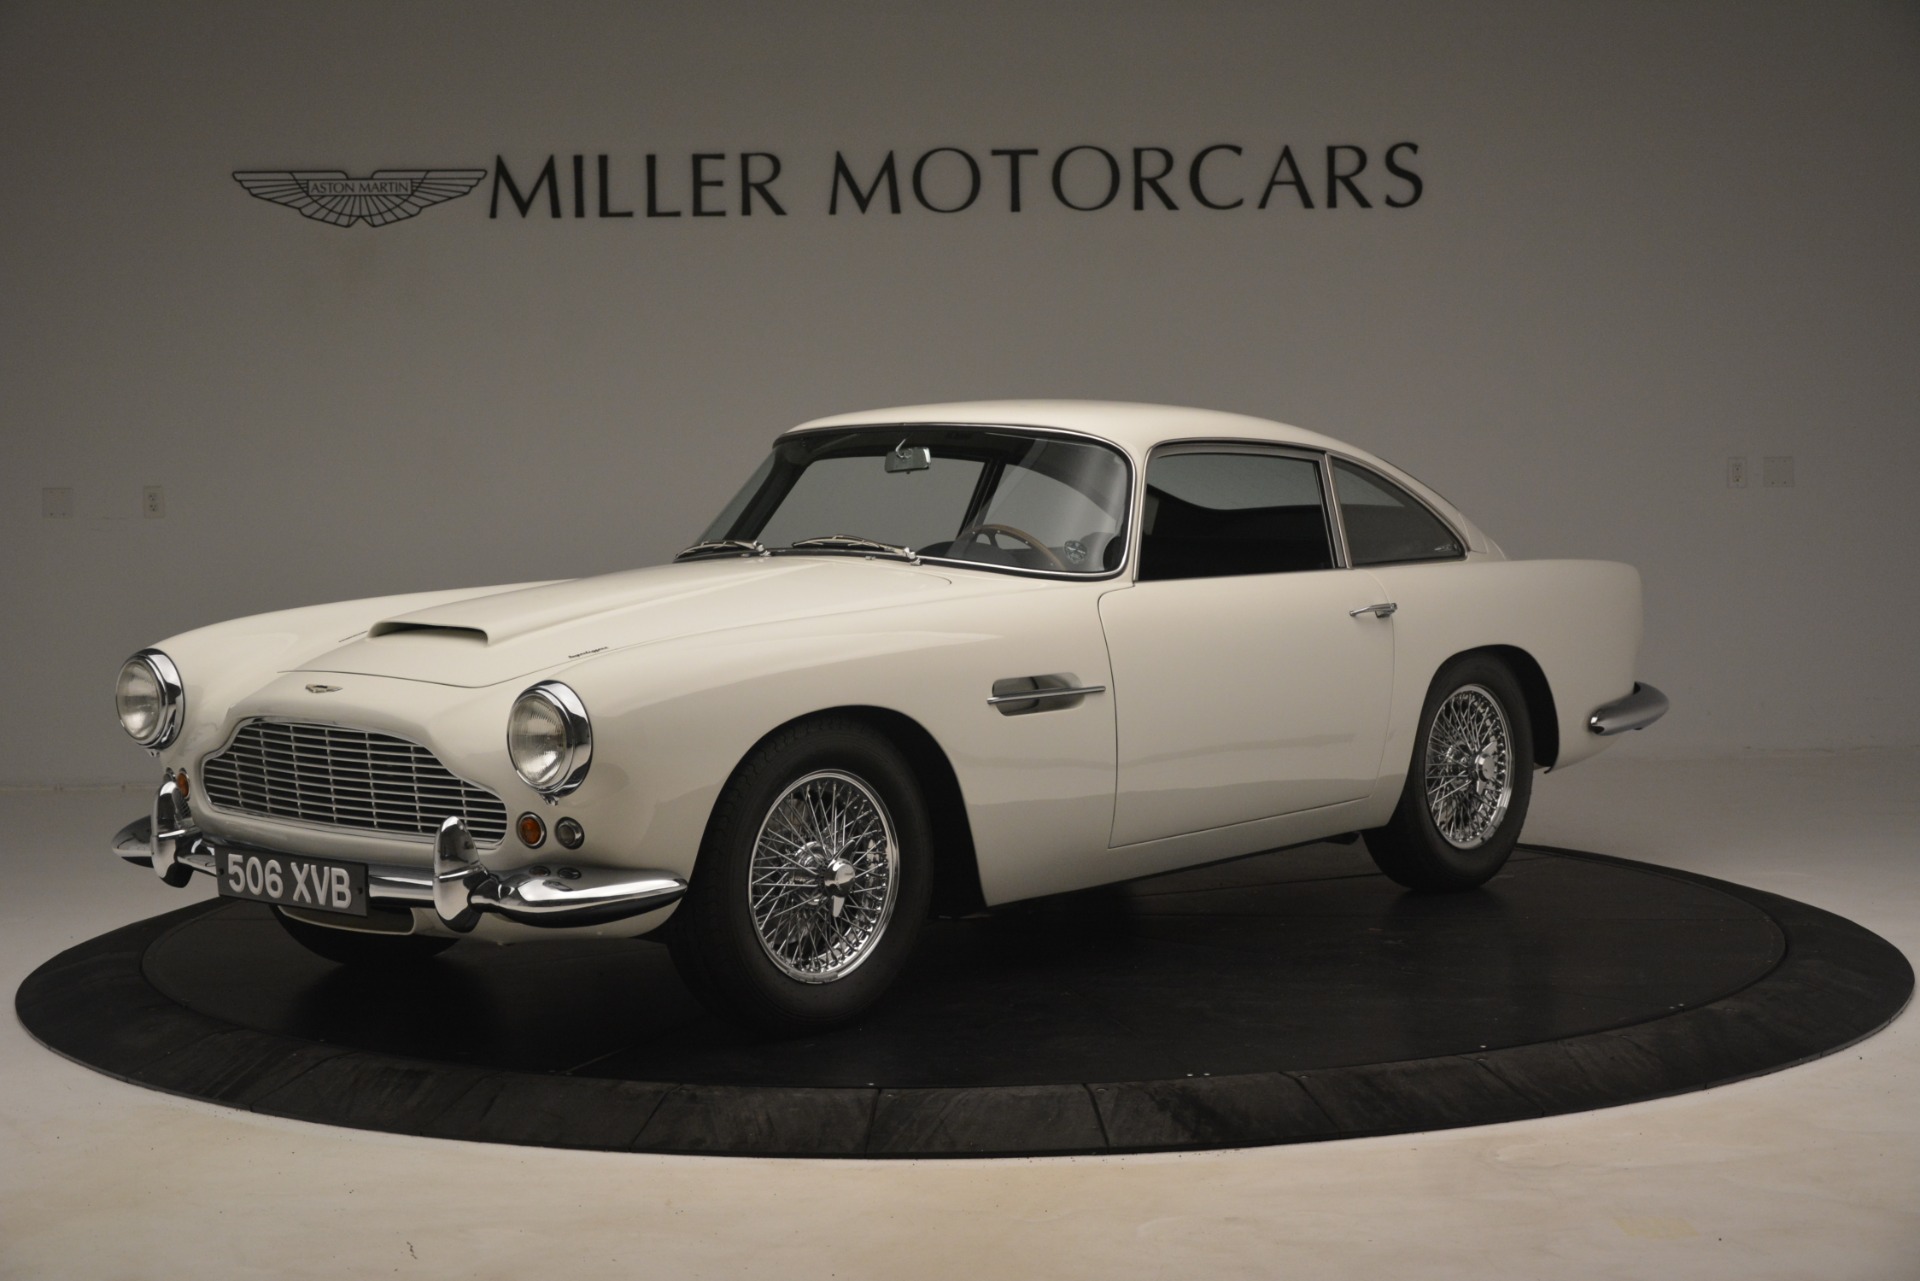 Used 1961 Aston Martin DB4 Series IV Coupe for sale Sold at Alfa Romeo of Westport in Westport CT 06880 1